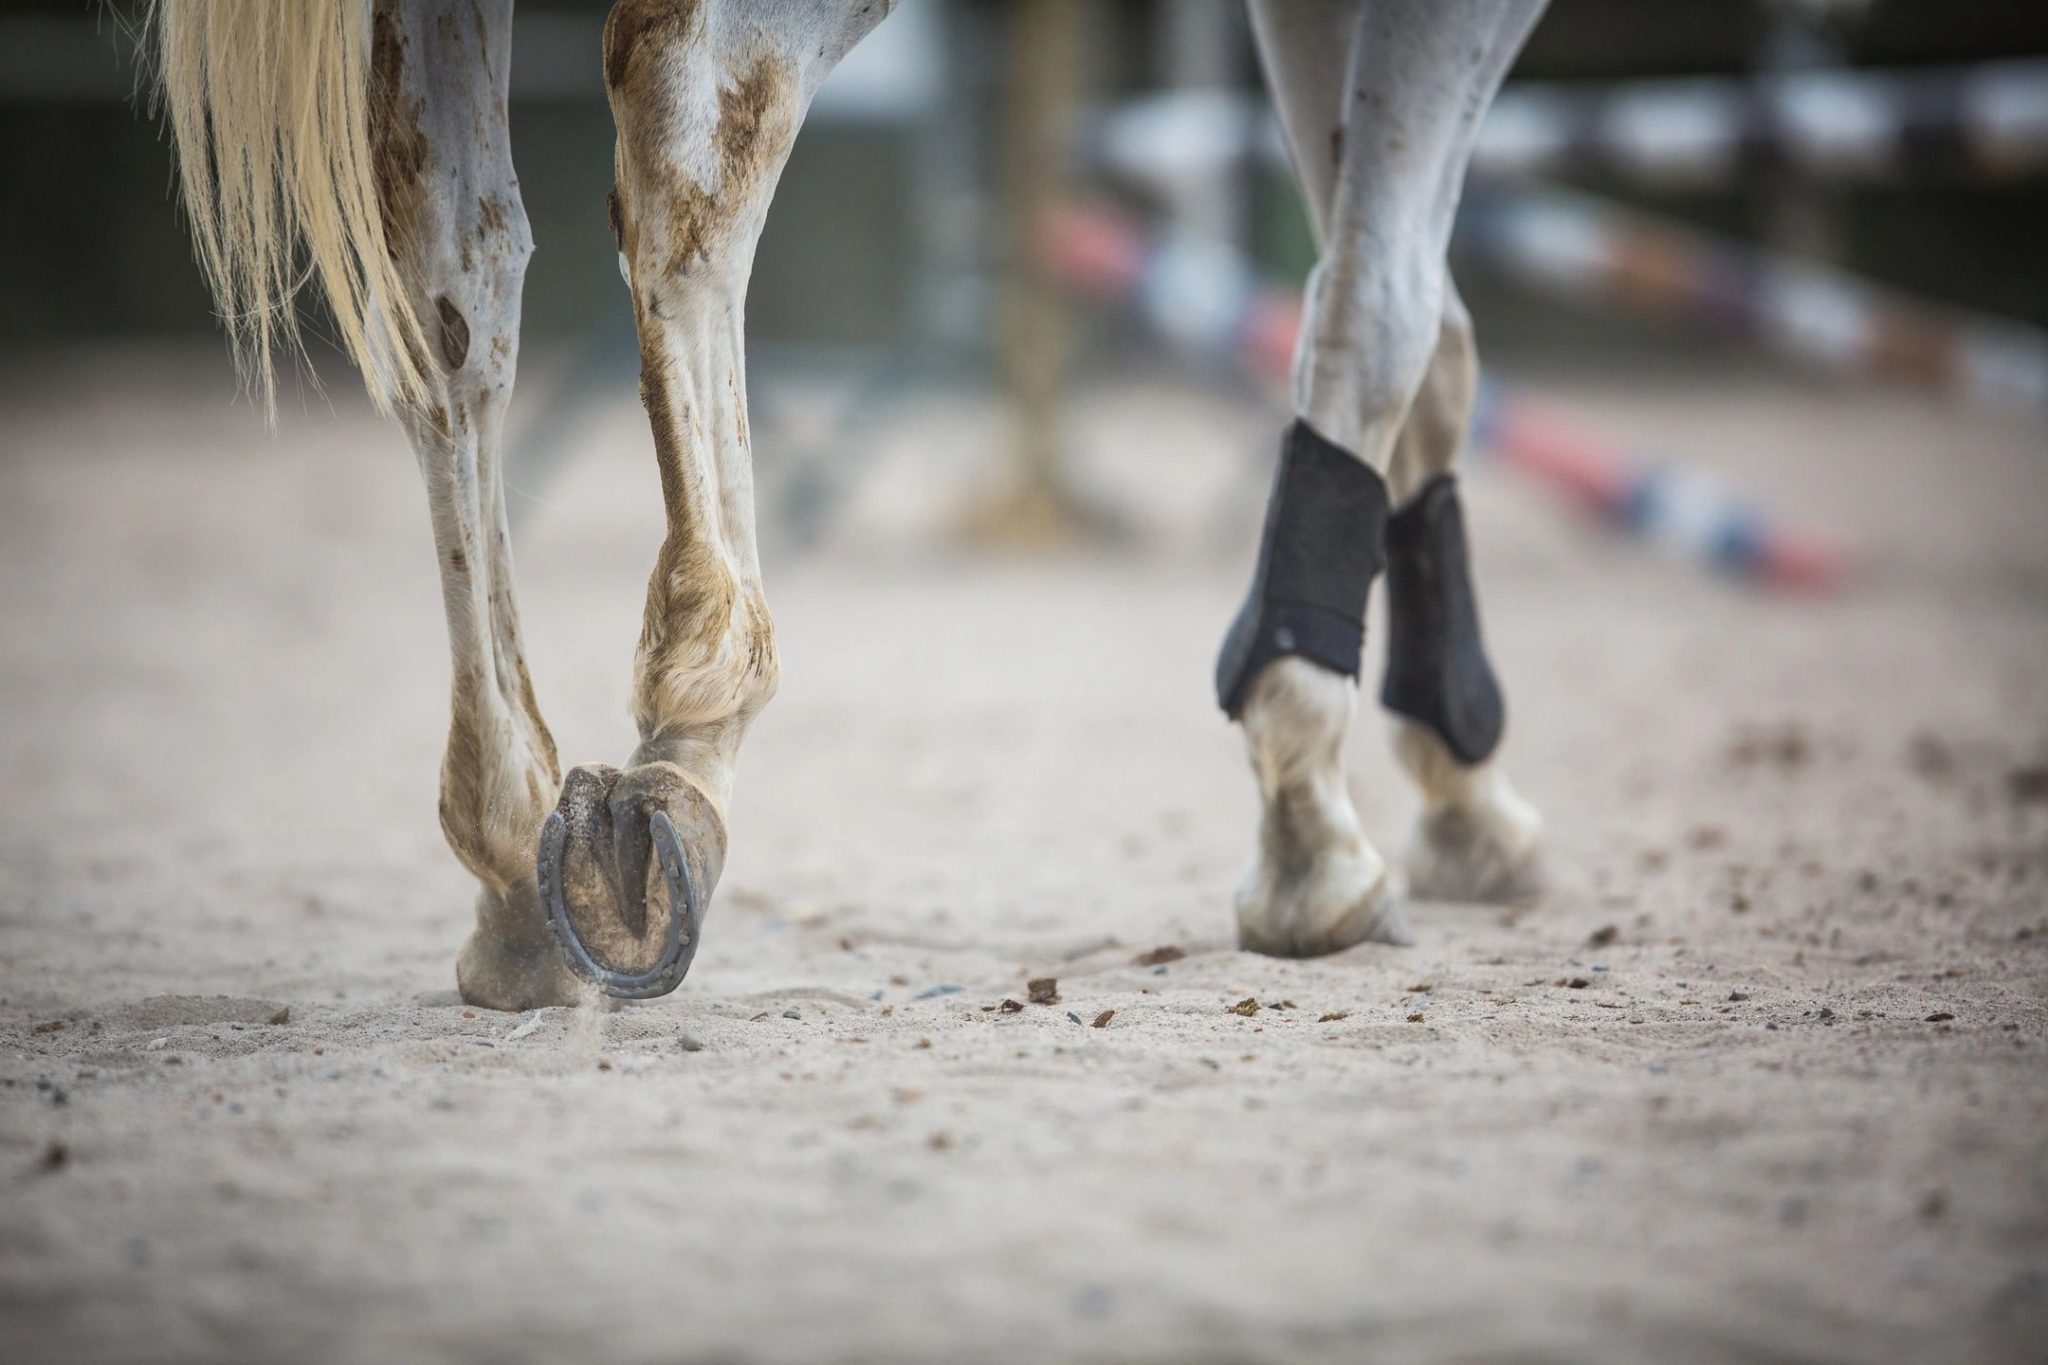 10 Most Common Injuries for Ex-Racehorses